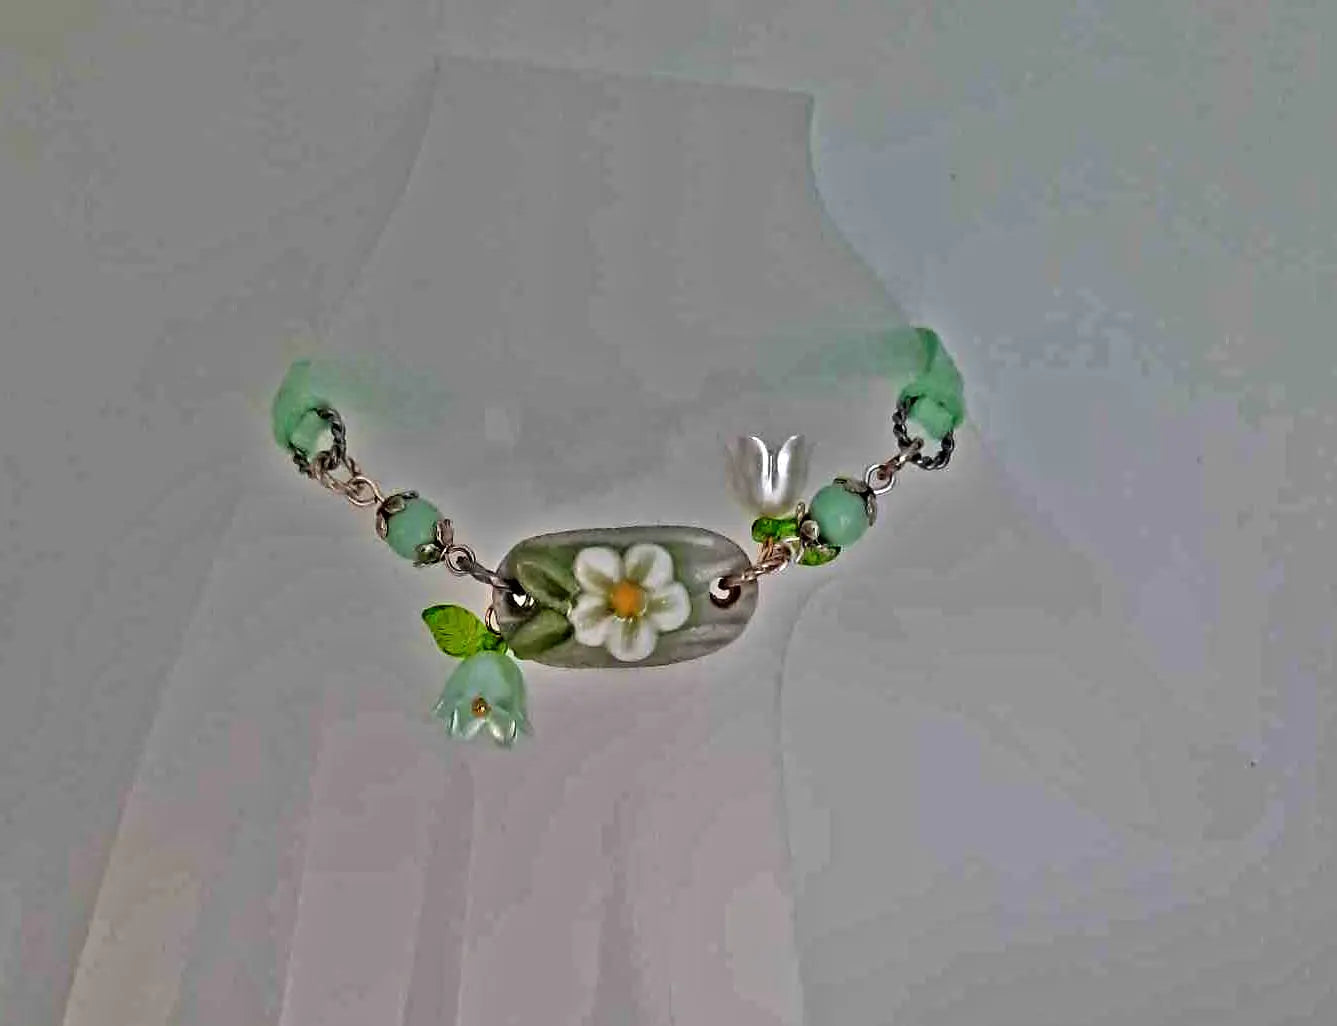 Handcrafted 2 layer faux suede ceramic flower bracelet - Image #1